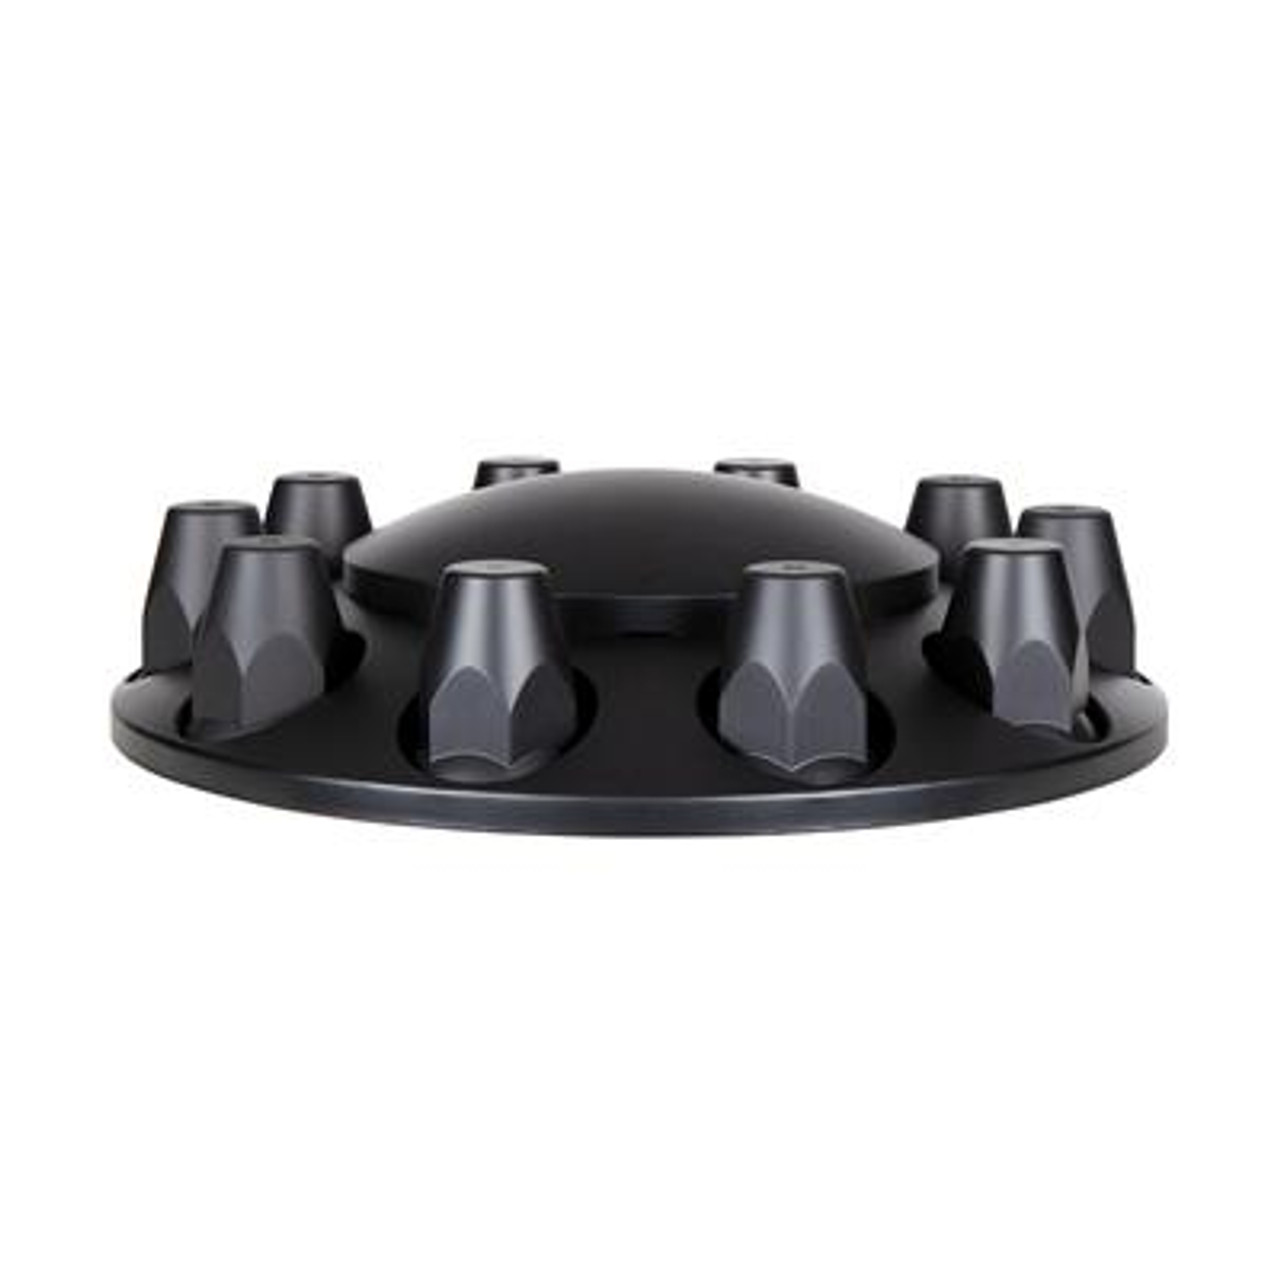 Dome Front Axle Cover With- 33mm Standard Thread-On Nut Covers - Matte Black